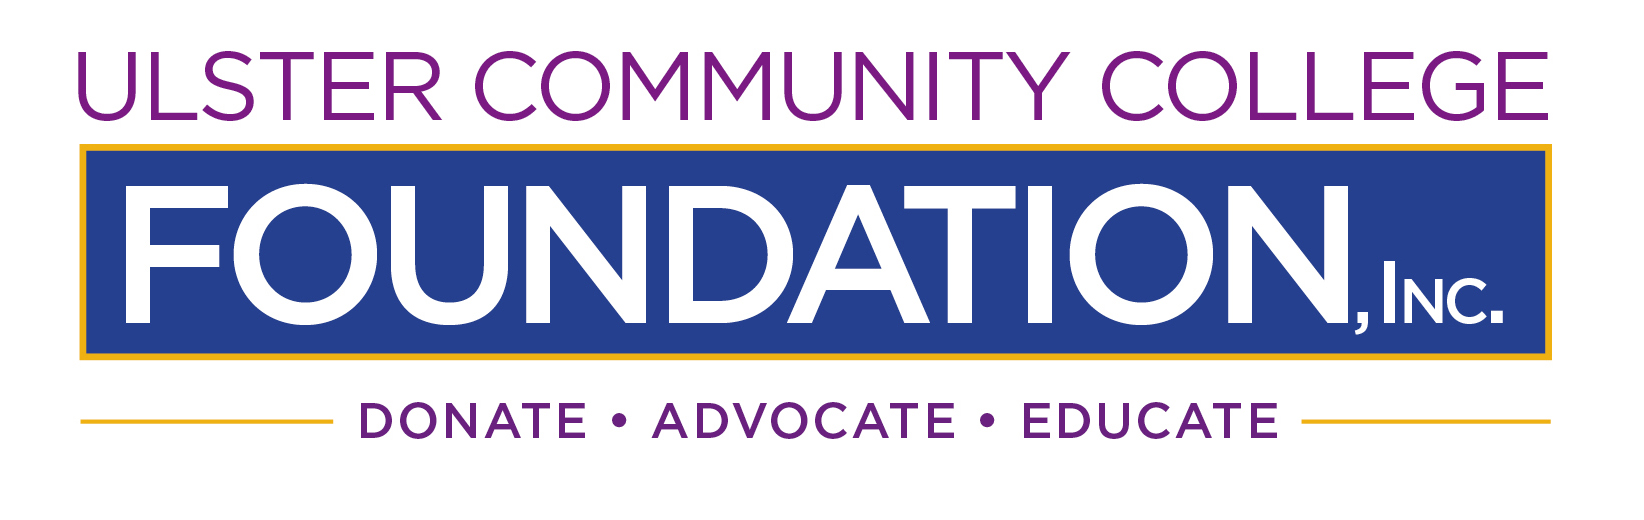 Ulster County Community College Foundation: Donate, Advocate, Educate